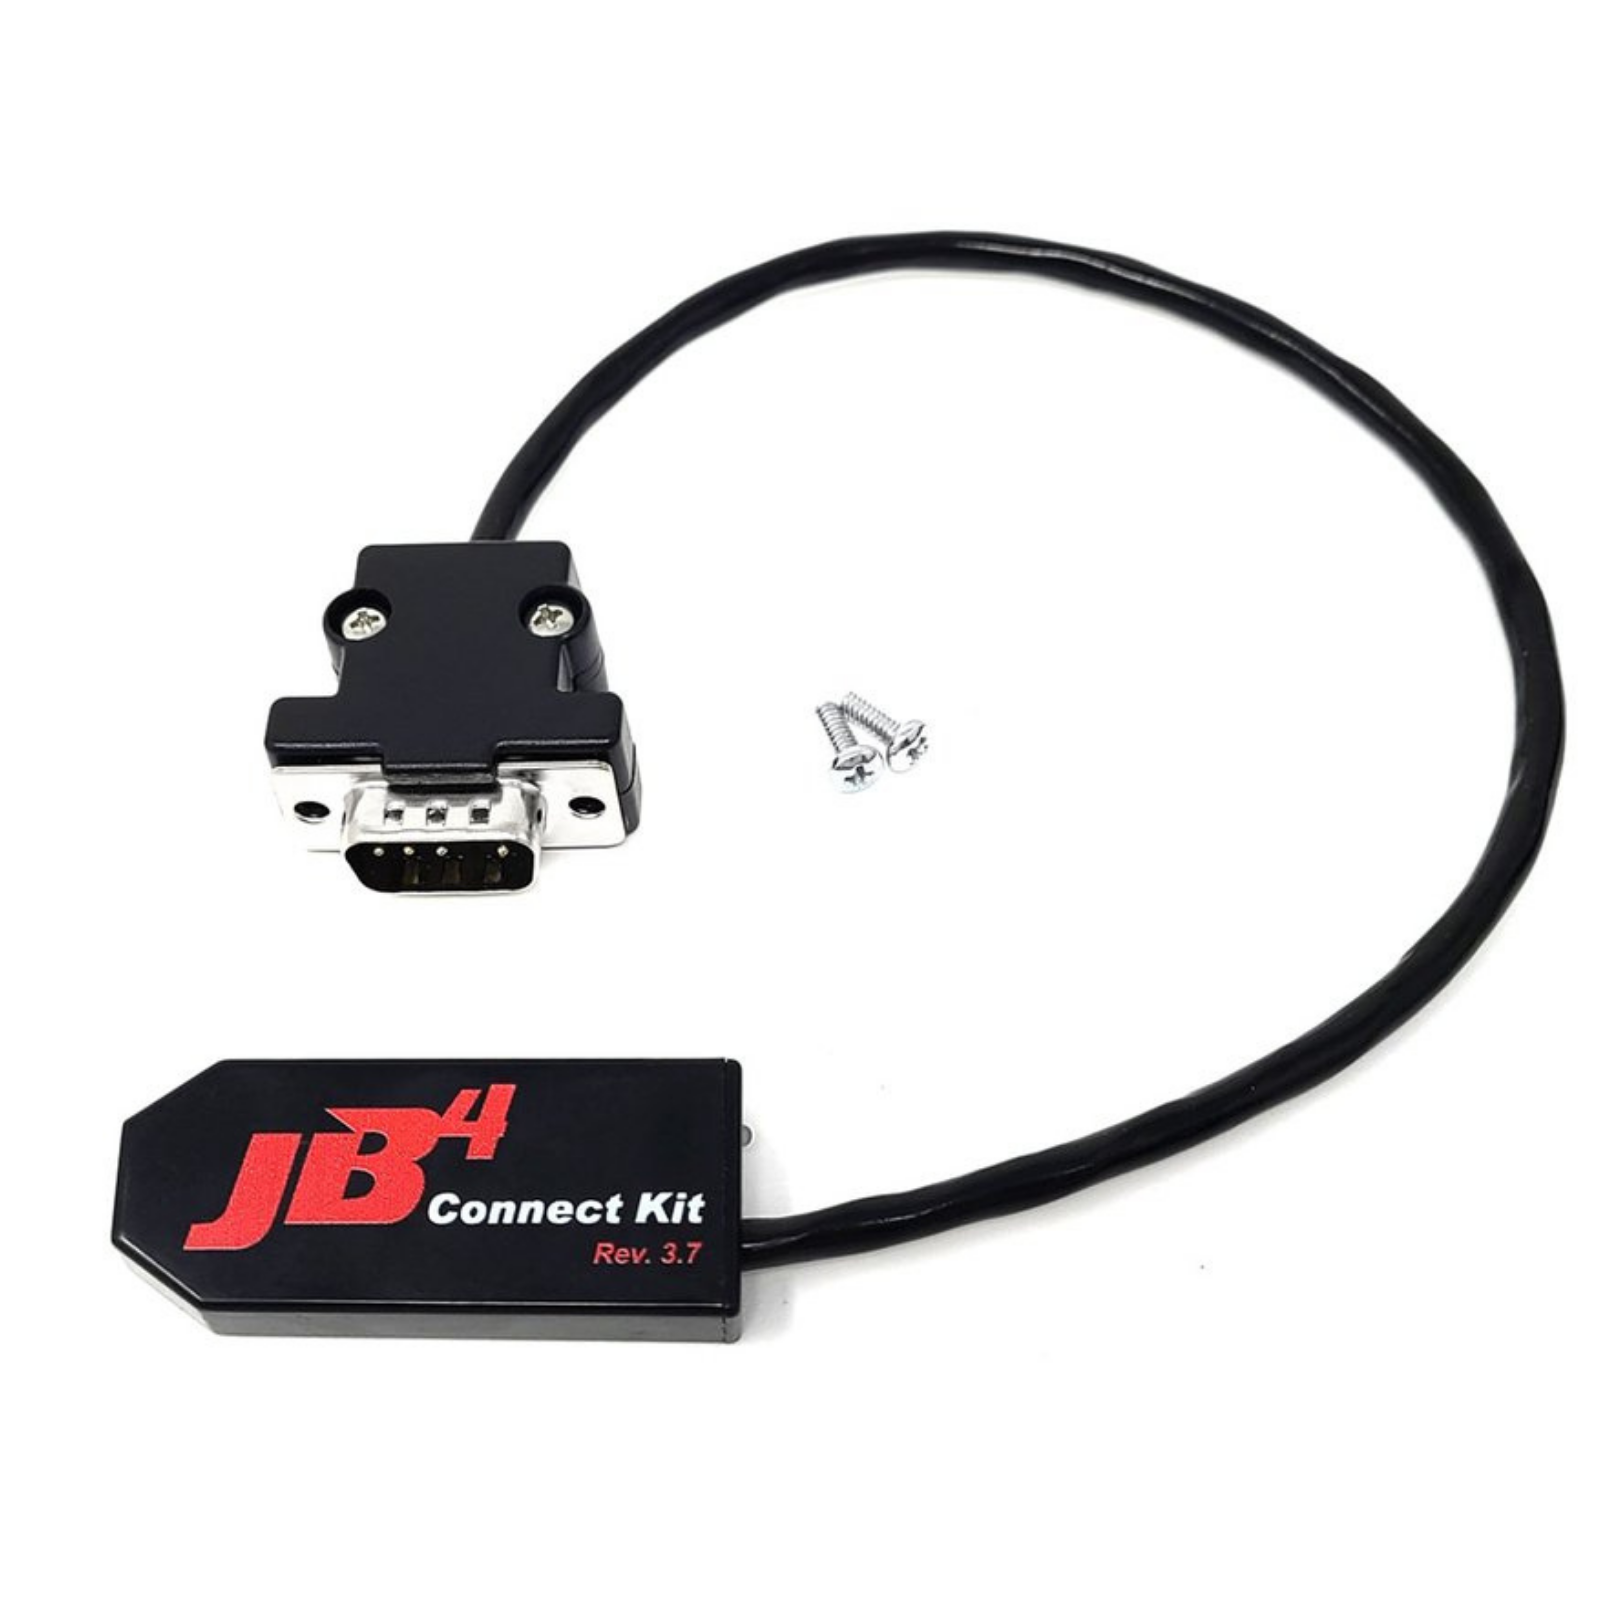 JB4 Bluetooth Wireless Phone & Tablet Connect Kit Rev 3.7 - Pinned Power Wire